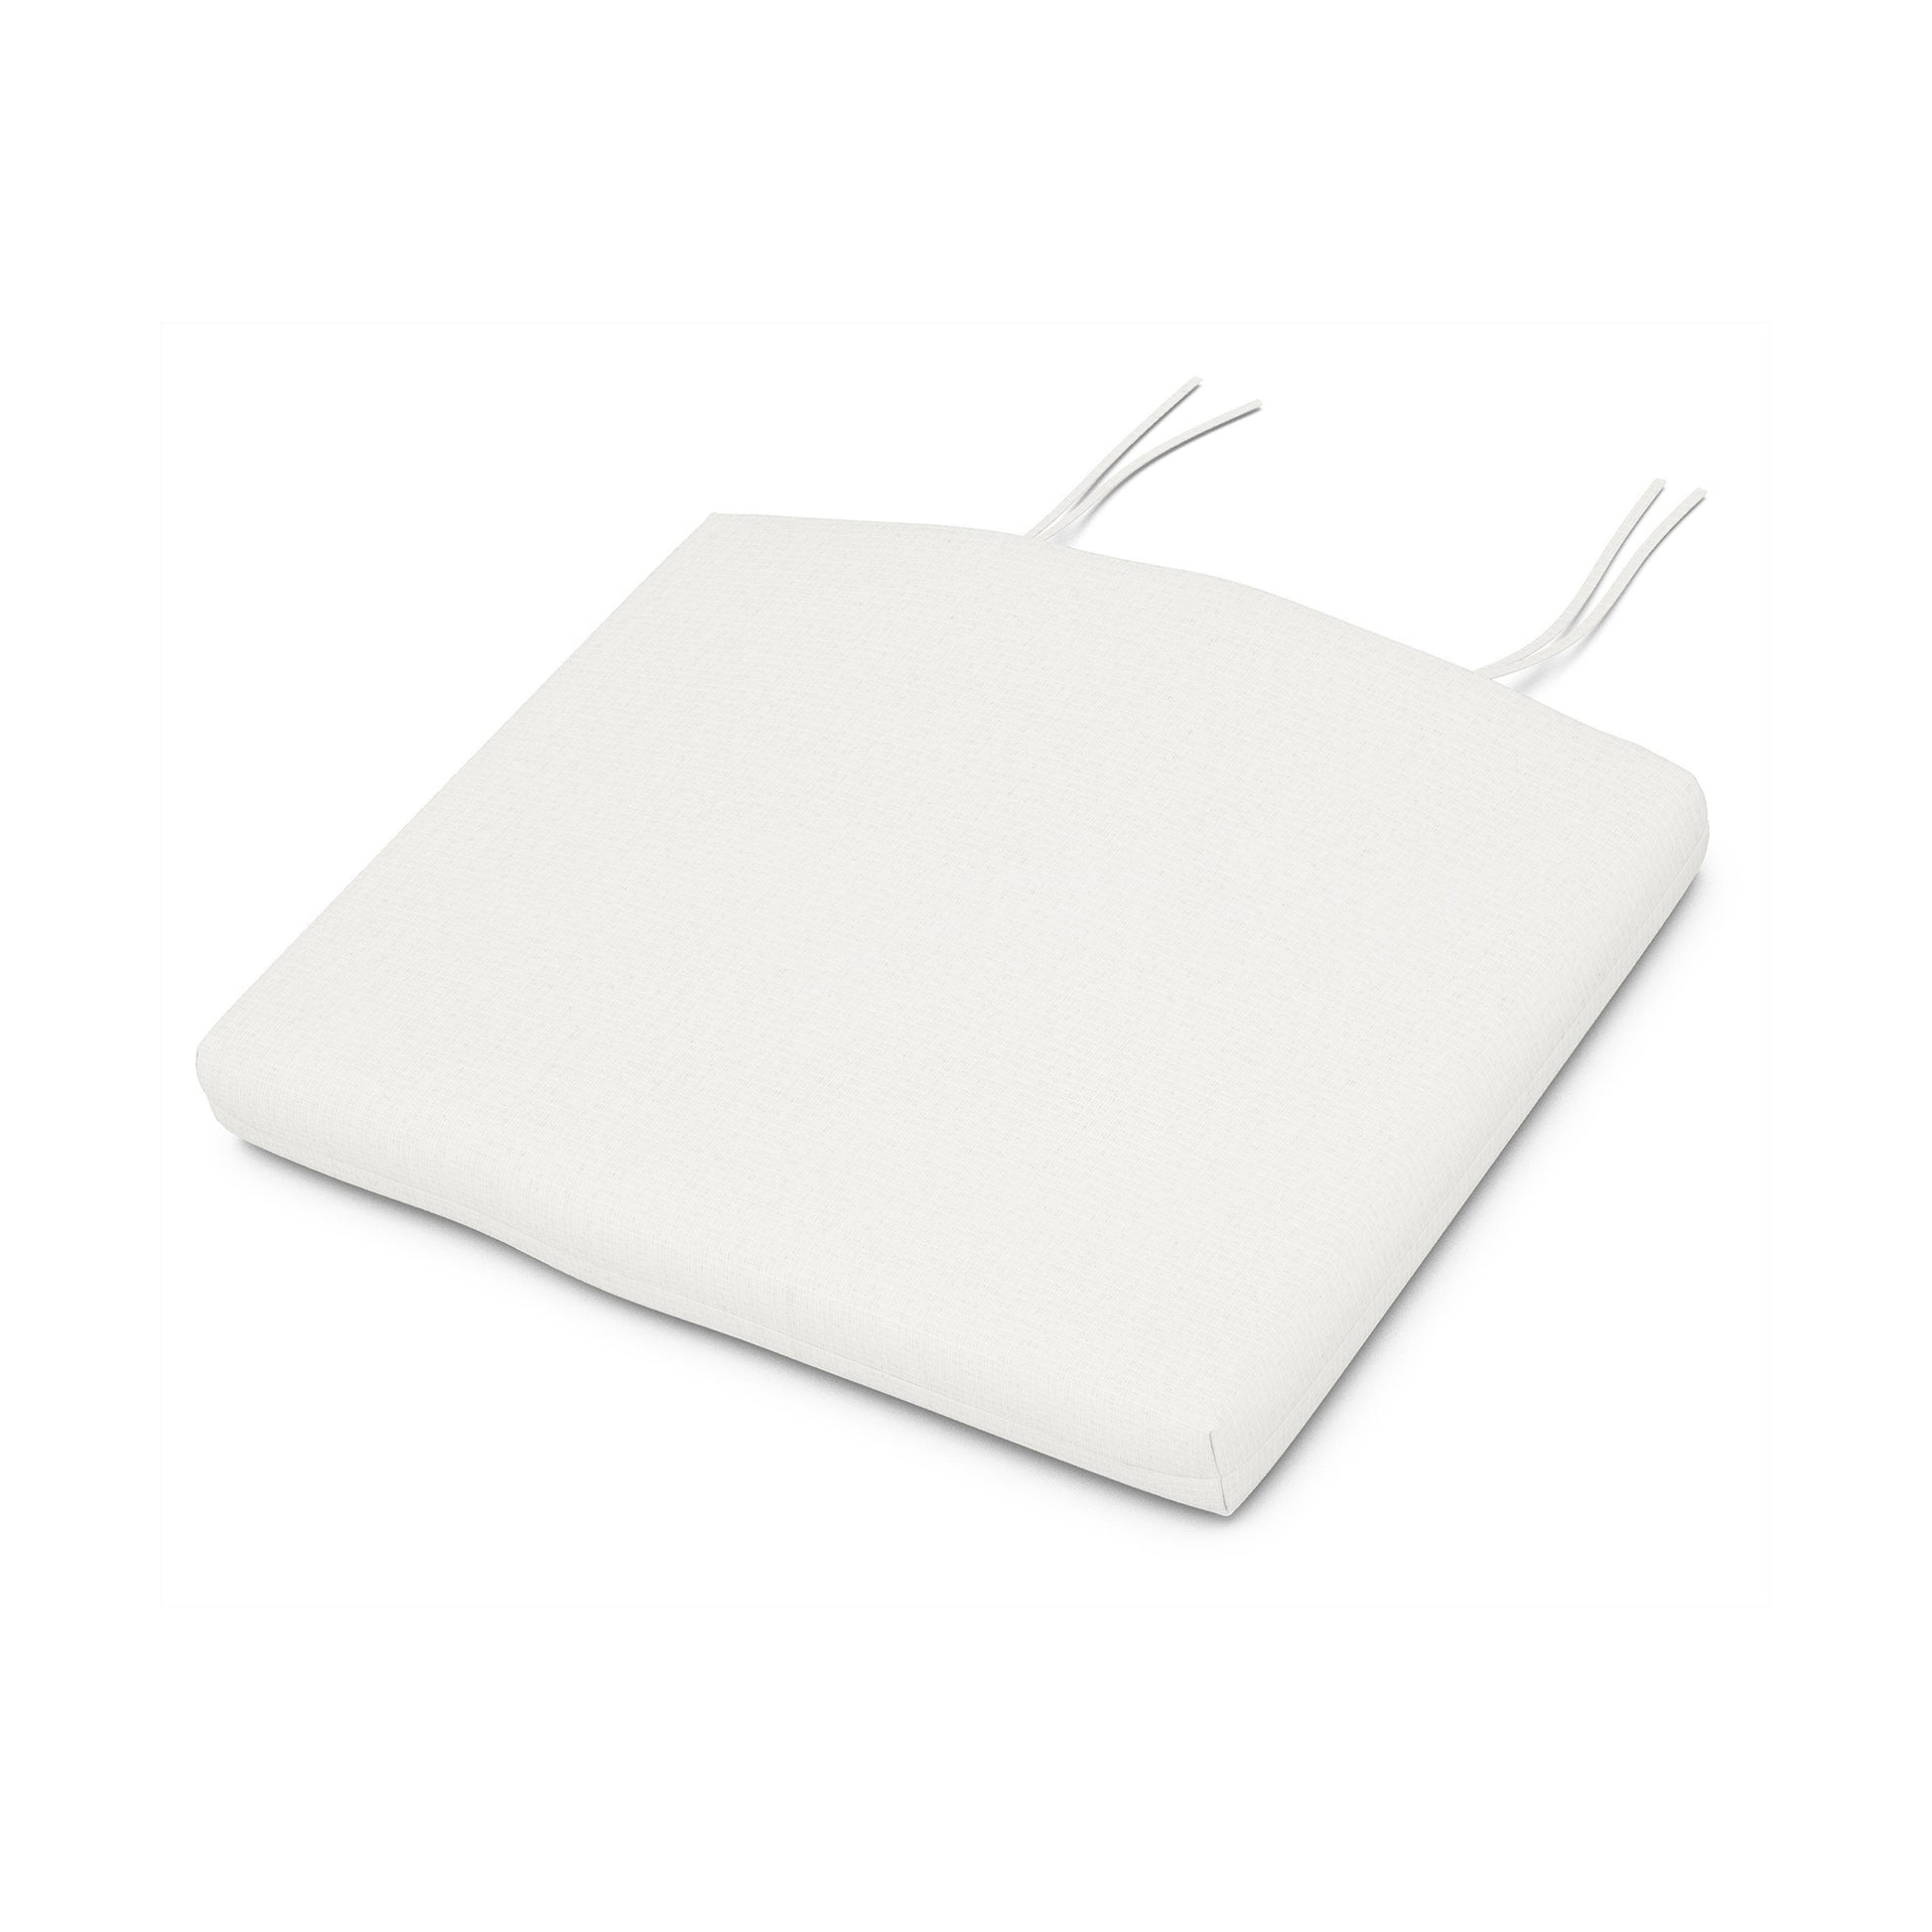 A white square POLYWOOD cushion with weather-resistant upholstery fabric on a white surface.